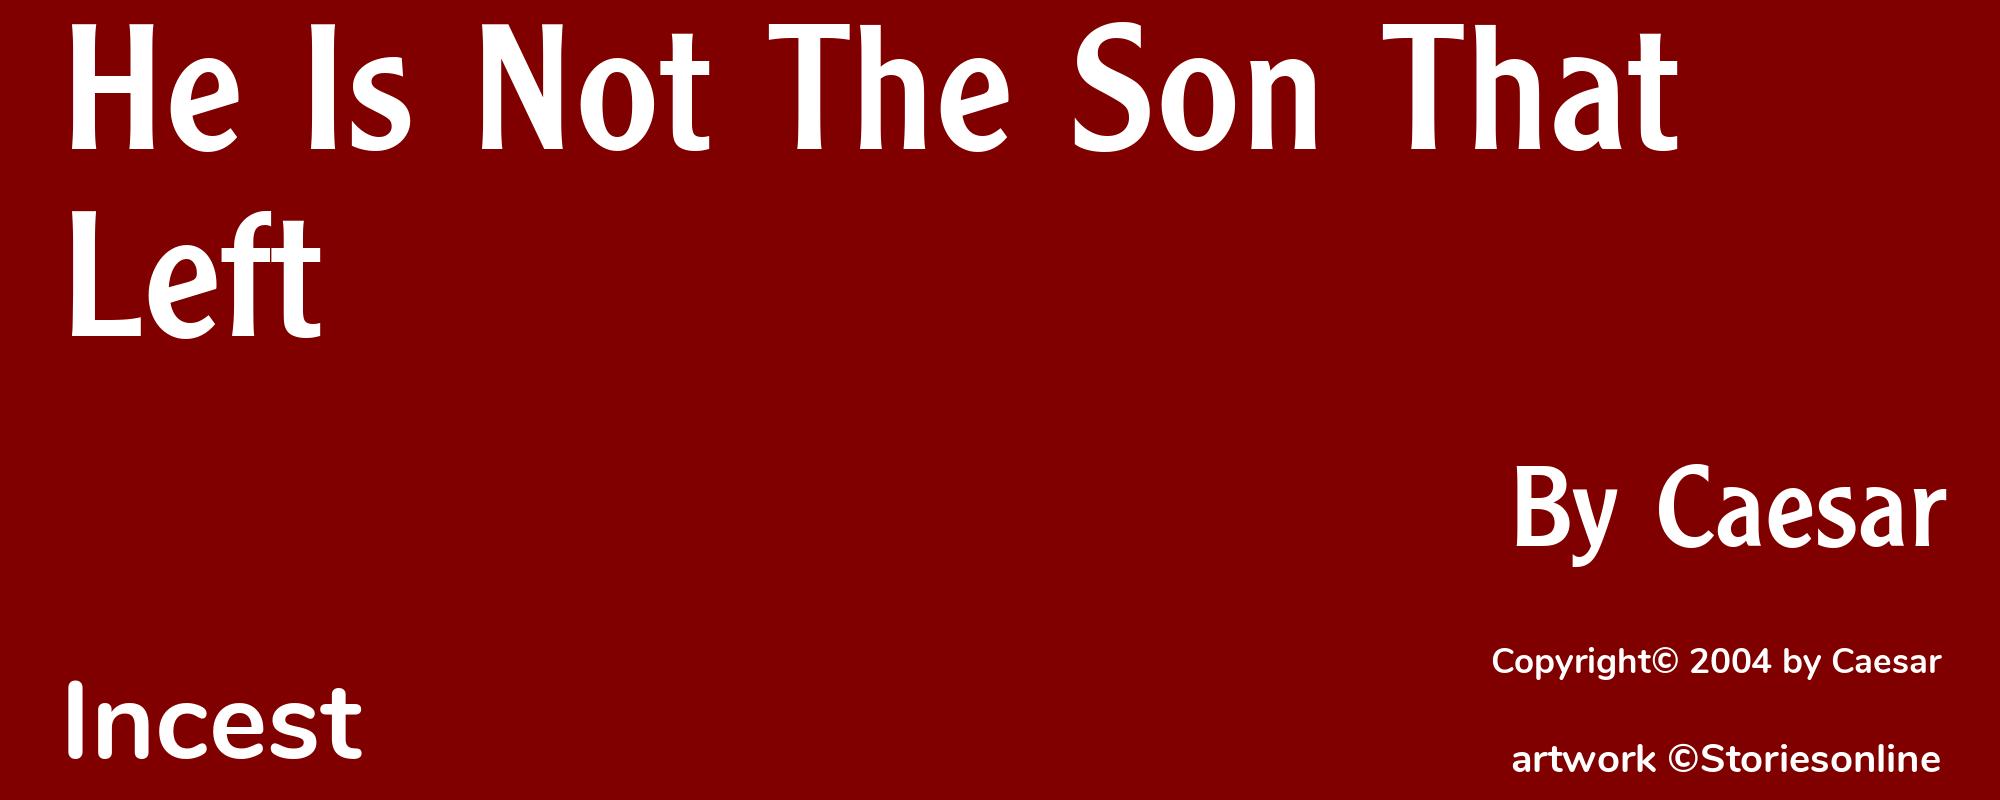 He Is Not The Son That Left - Cover